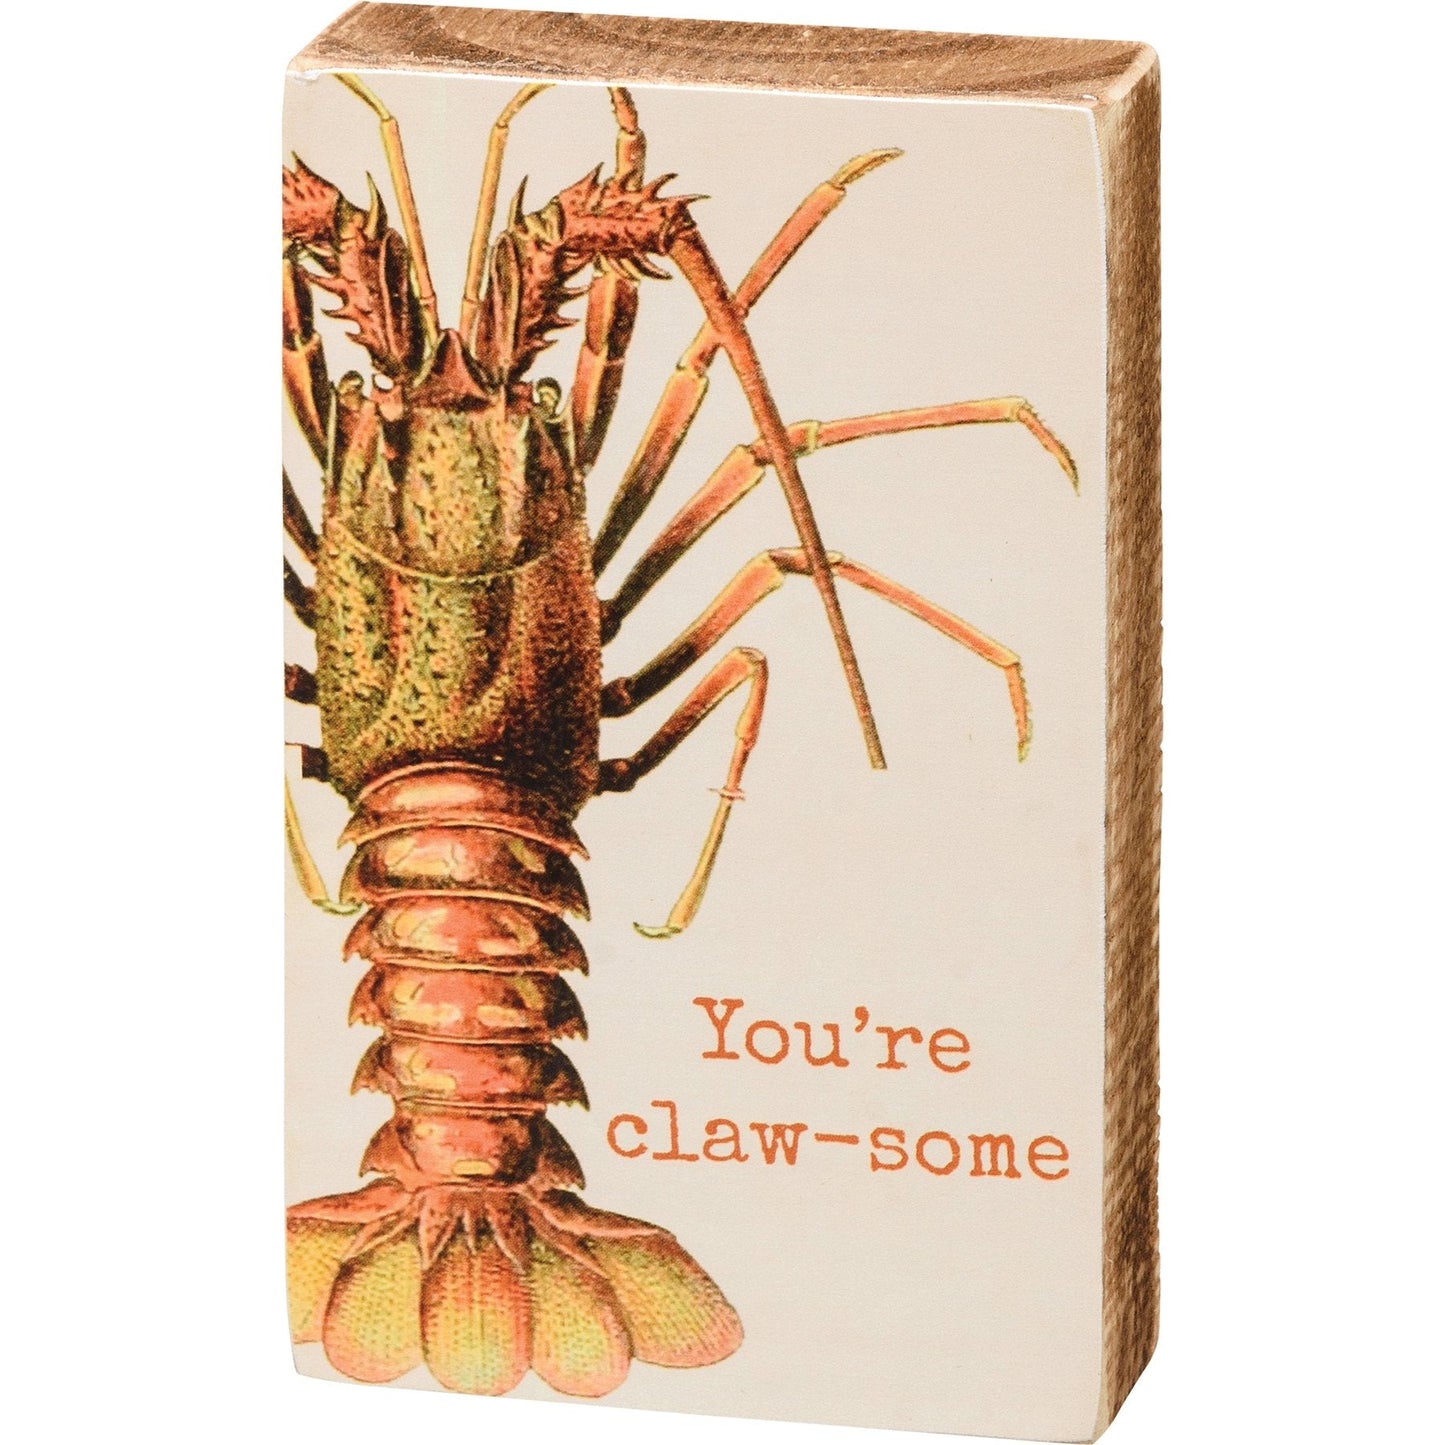 You're Claw-Some Wooden Block Sign | 3" x 5"